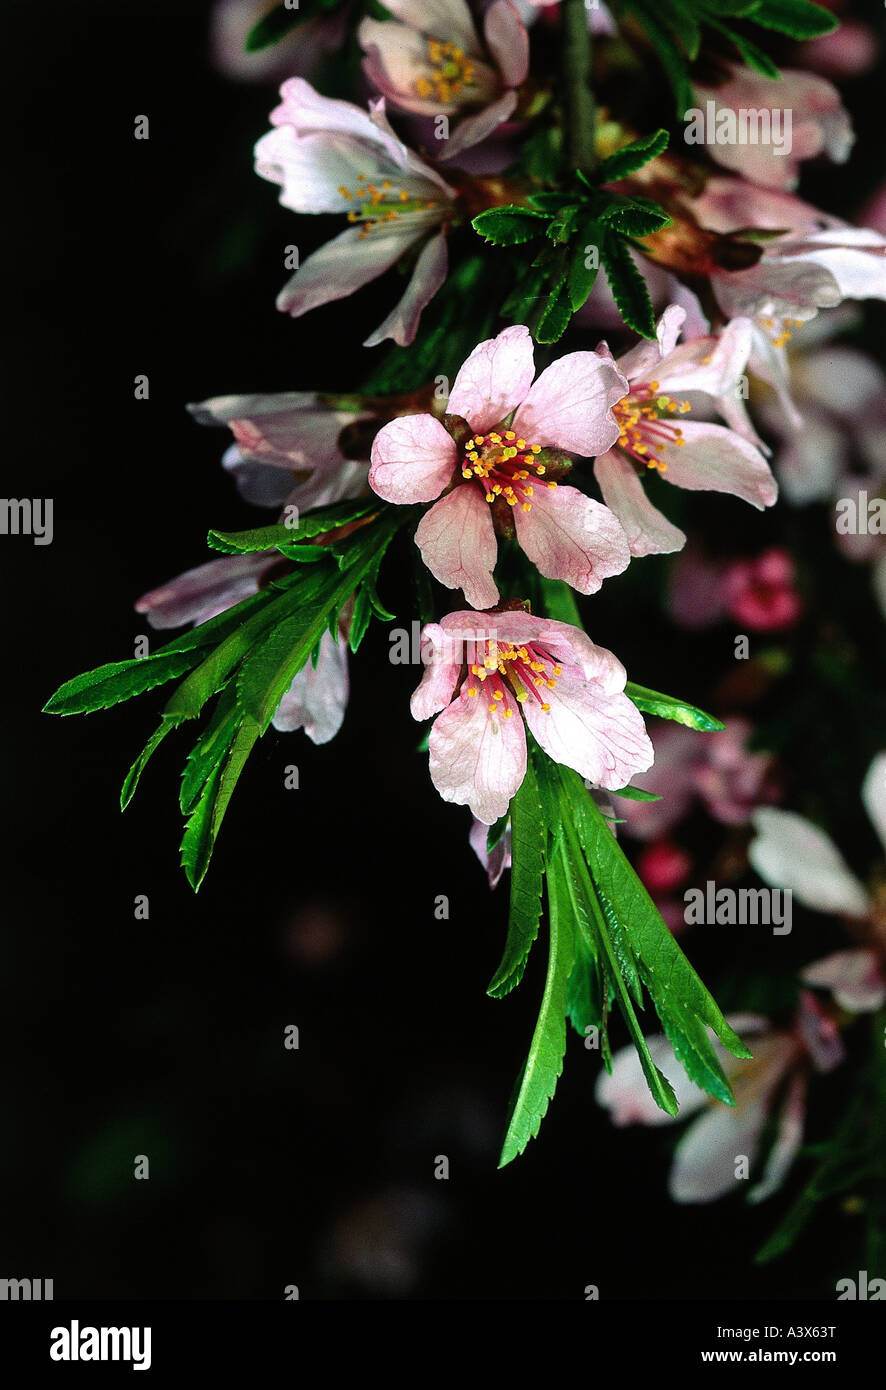 botany, Dwarf Russian almond, (Prunus tenella), blossoms, at branch, leaf, leaves, blooming, Rosaceae, Rosidae, Rosales, Amygdal Stock Photo